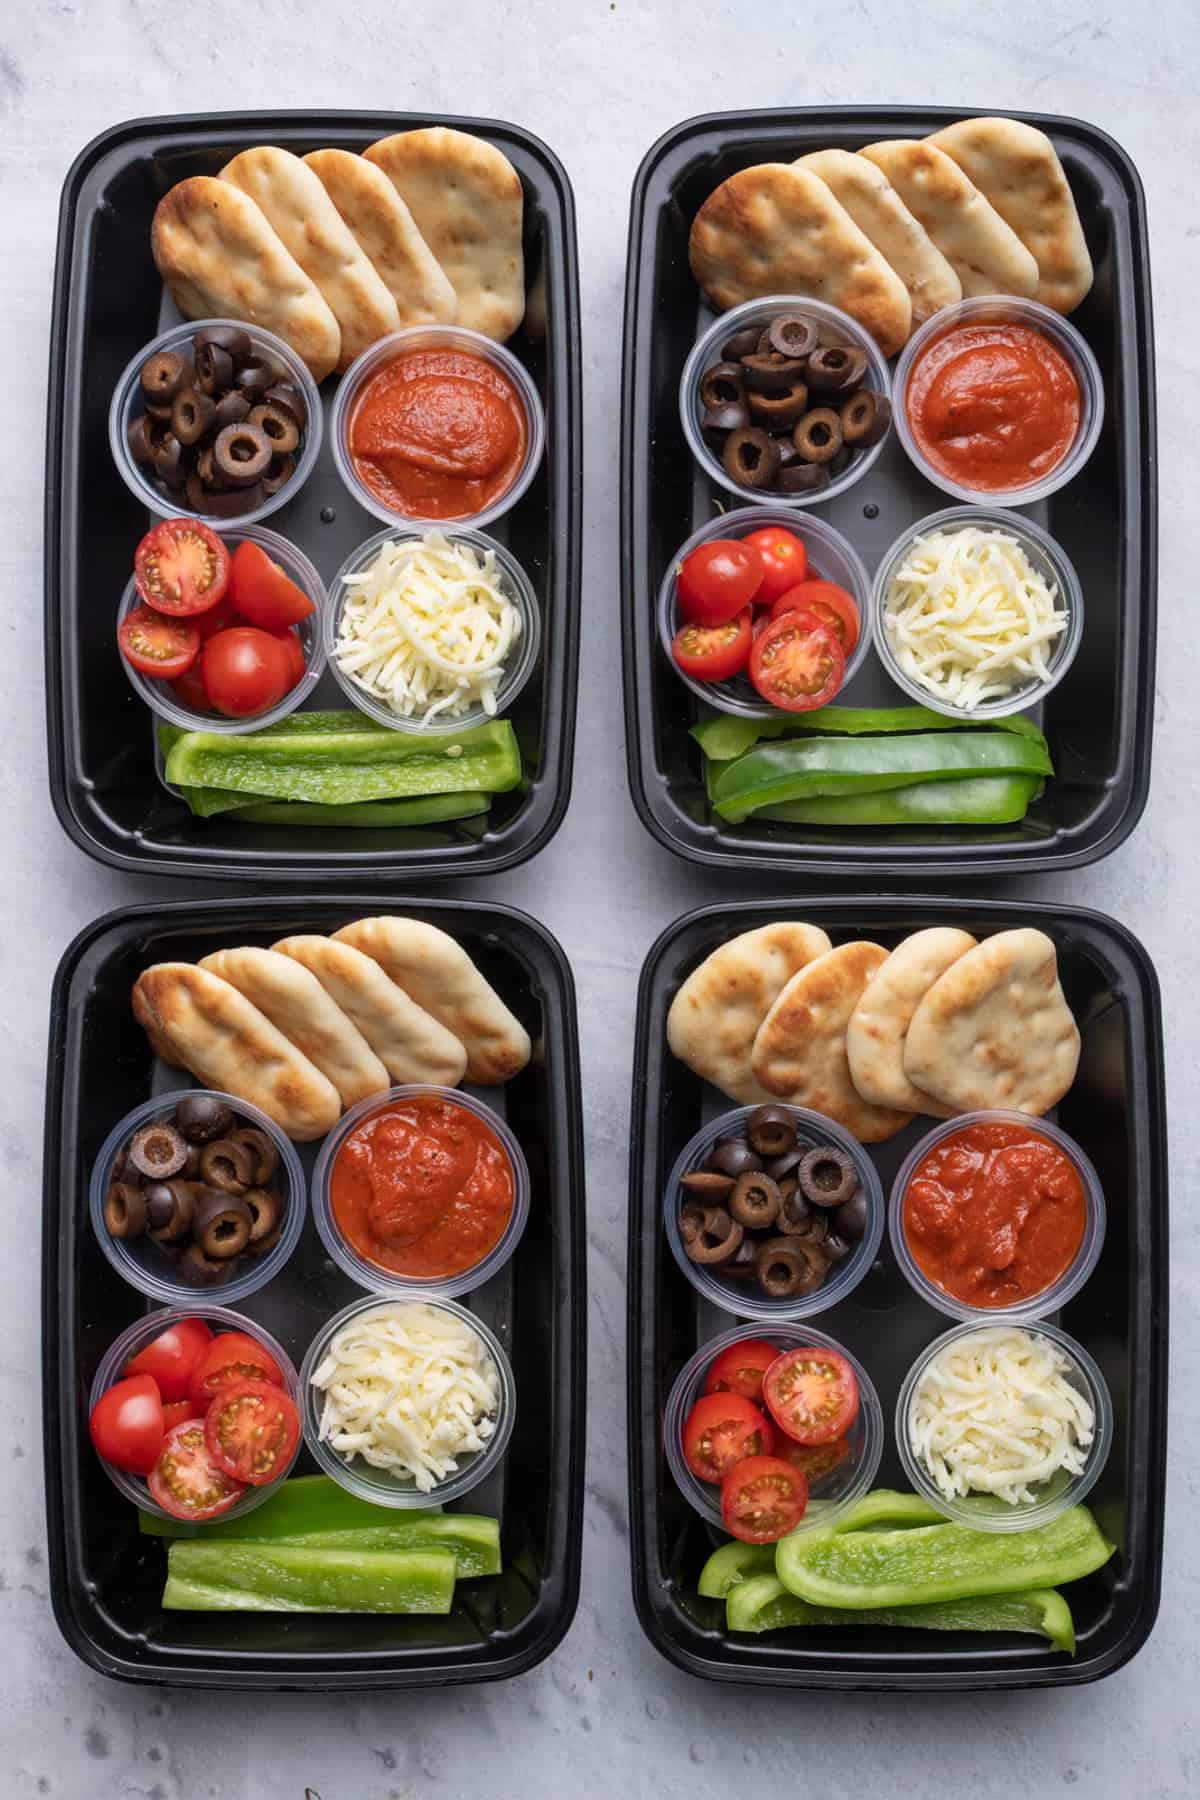 https://feelgoodfoodie.net/wp-content/uploads/2021/09/DIY-Pizza-Lunchable-07.jpg